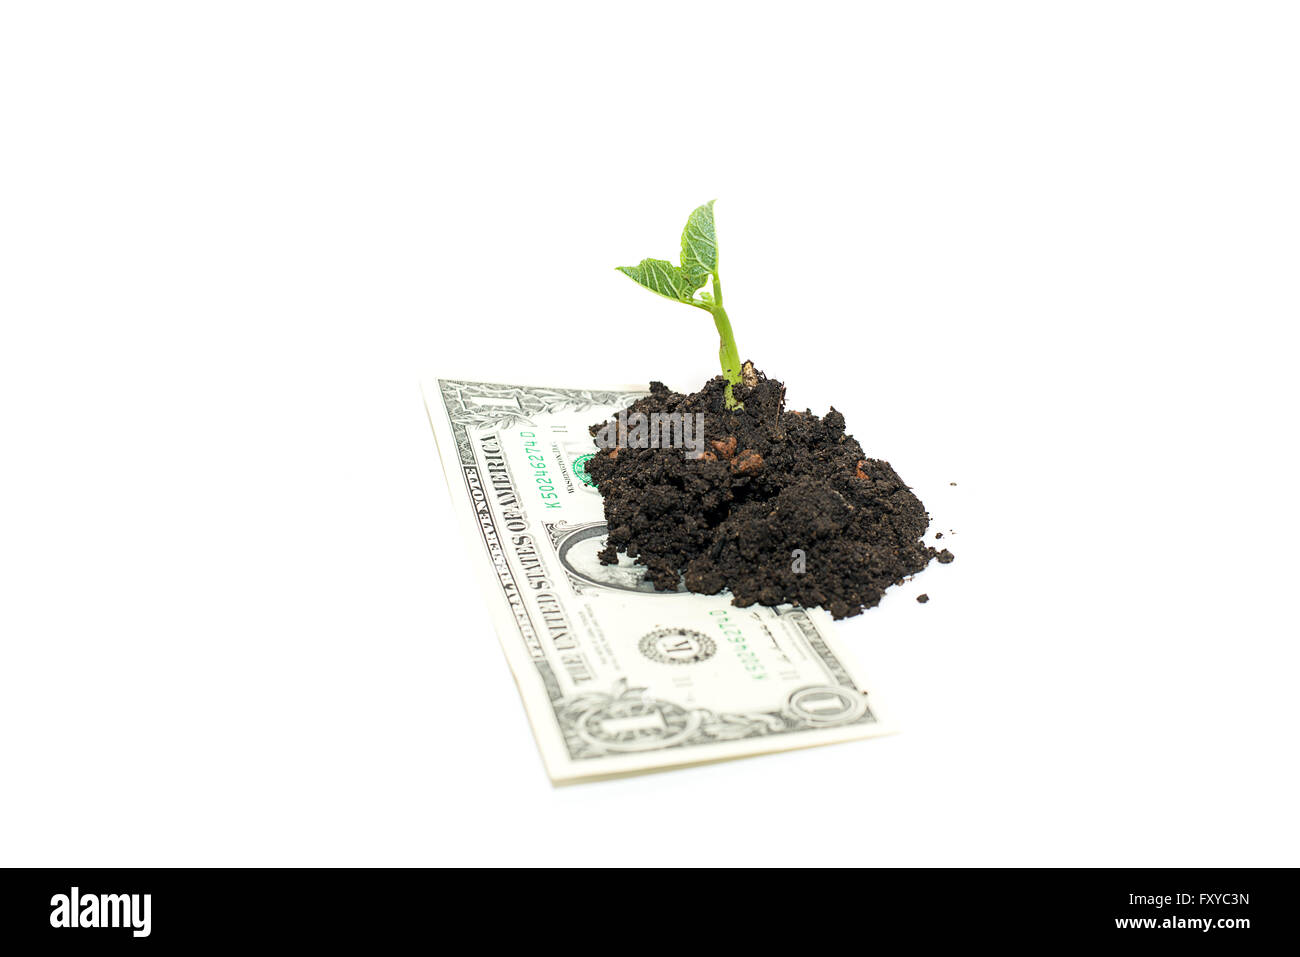 Green plants sprout up from the pile of soil on the banknote Stock Photo